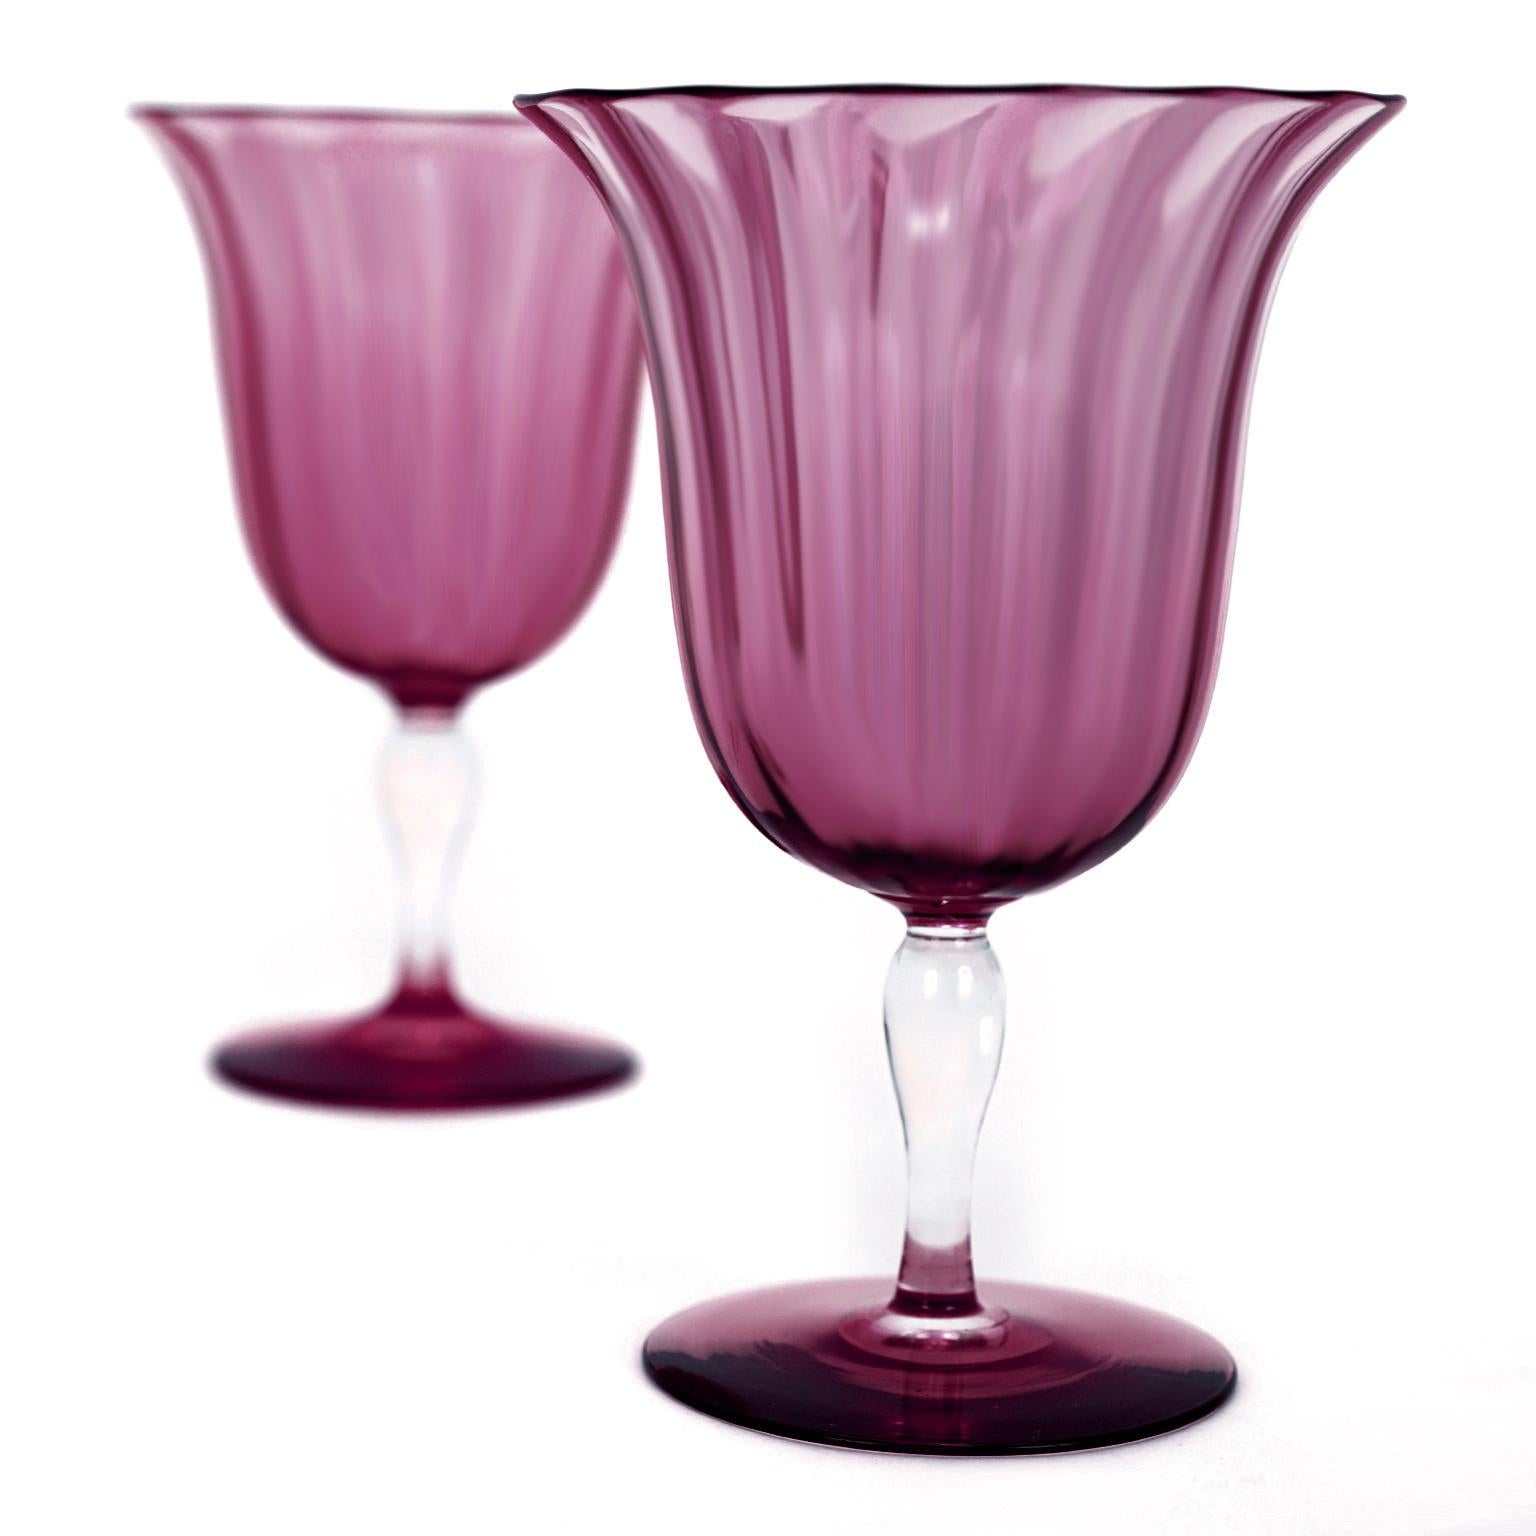 12 Steuben Optic Rib Water Glasses in Amethyst In Excellent Condition For Sale In Litchfield, CT